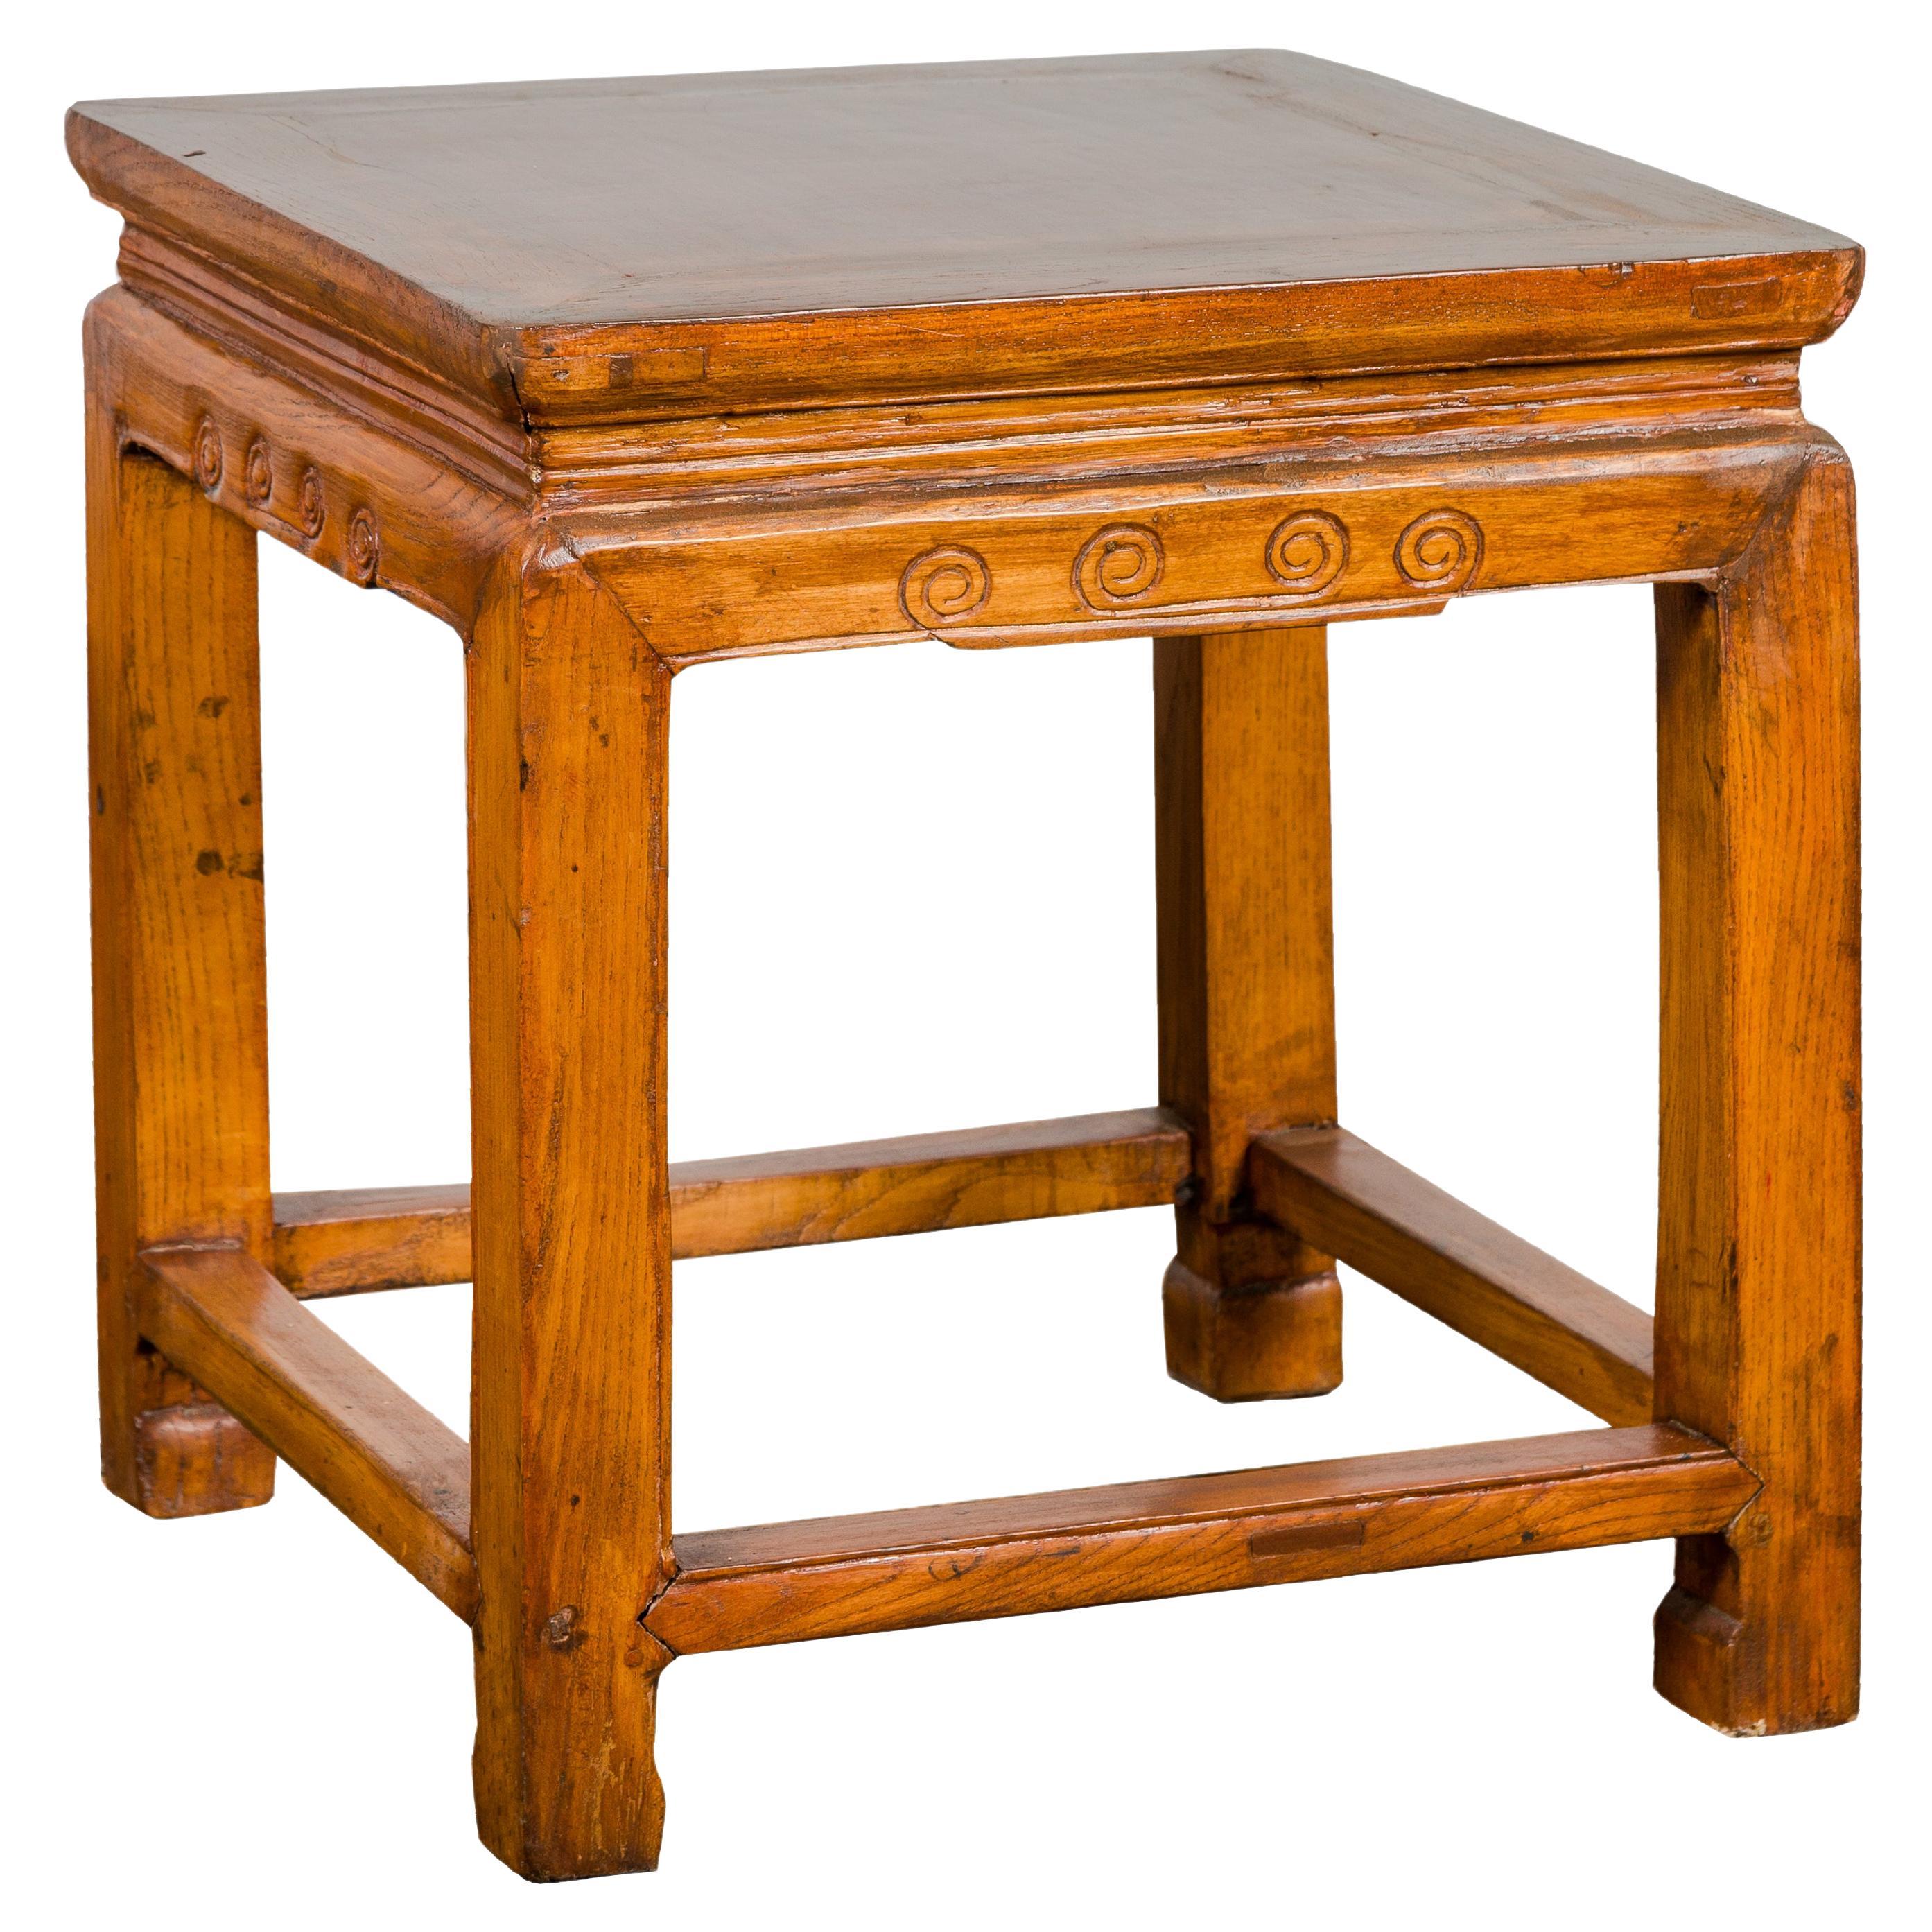 Chinese Elm Qing Dynasty Period Side Table with Horse Hoof Legs and Stretchers For Sale